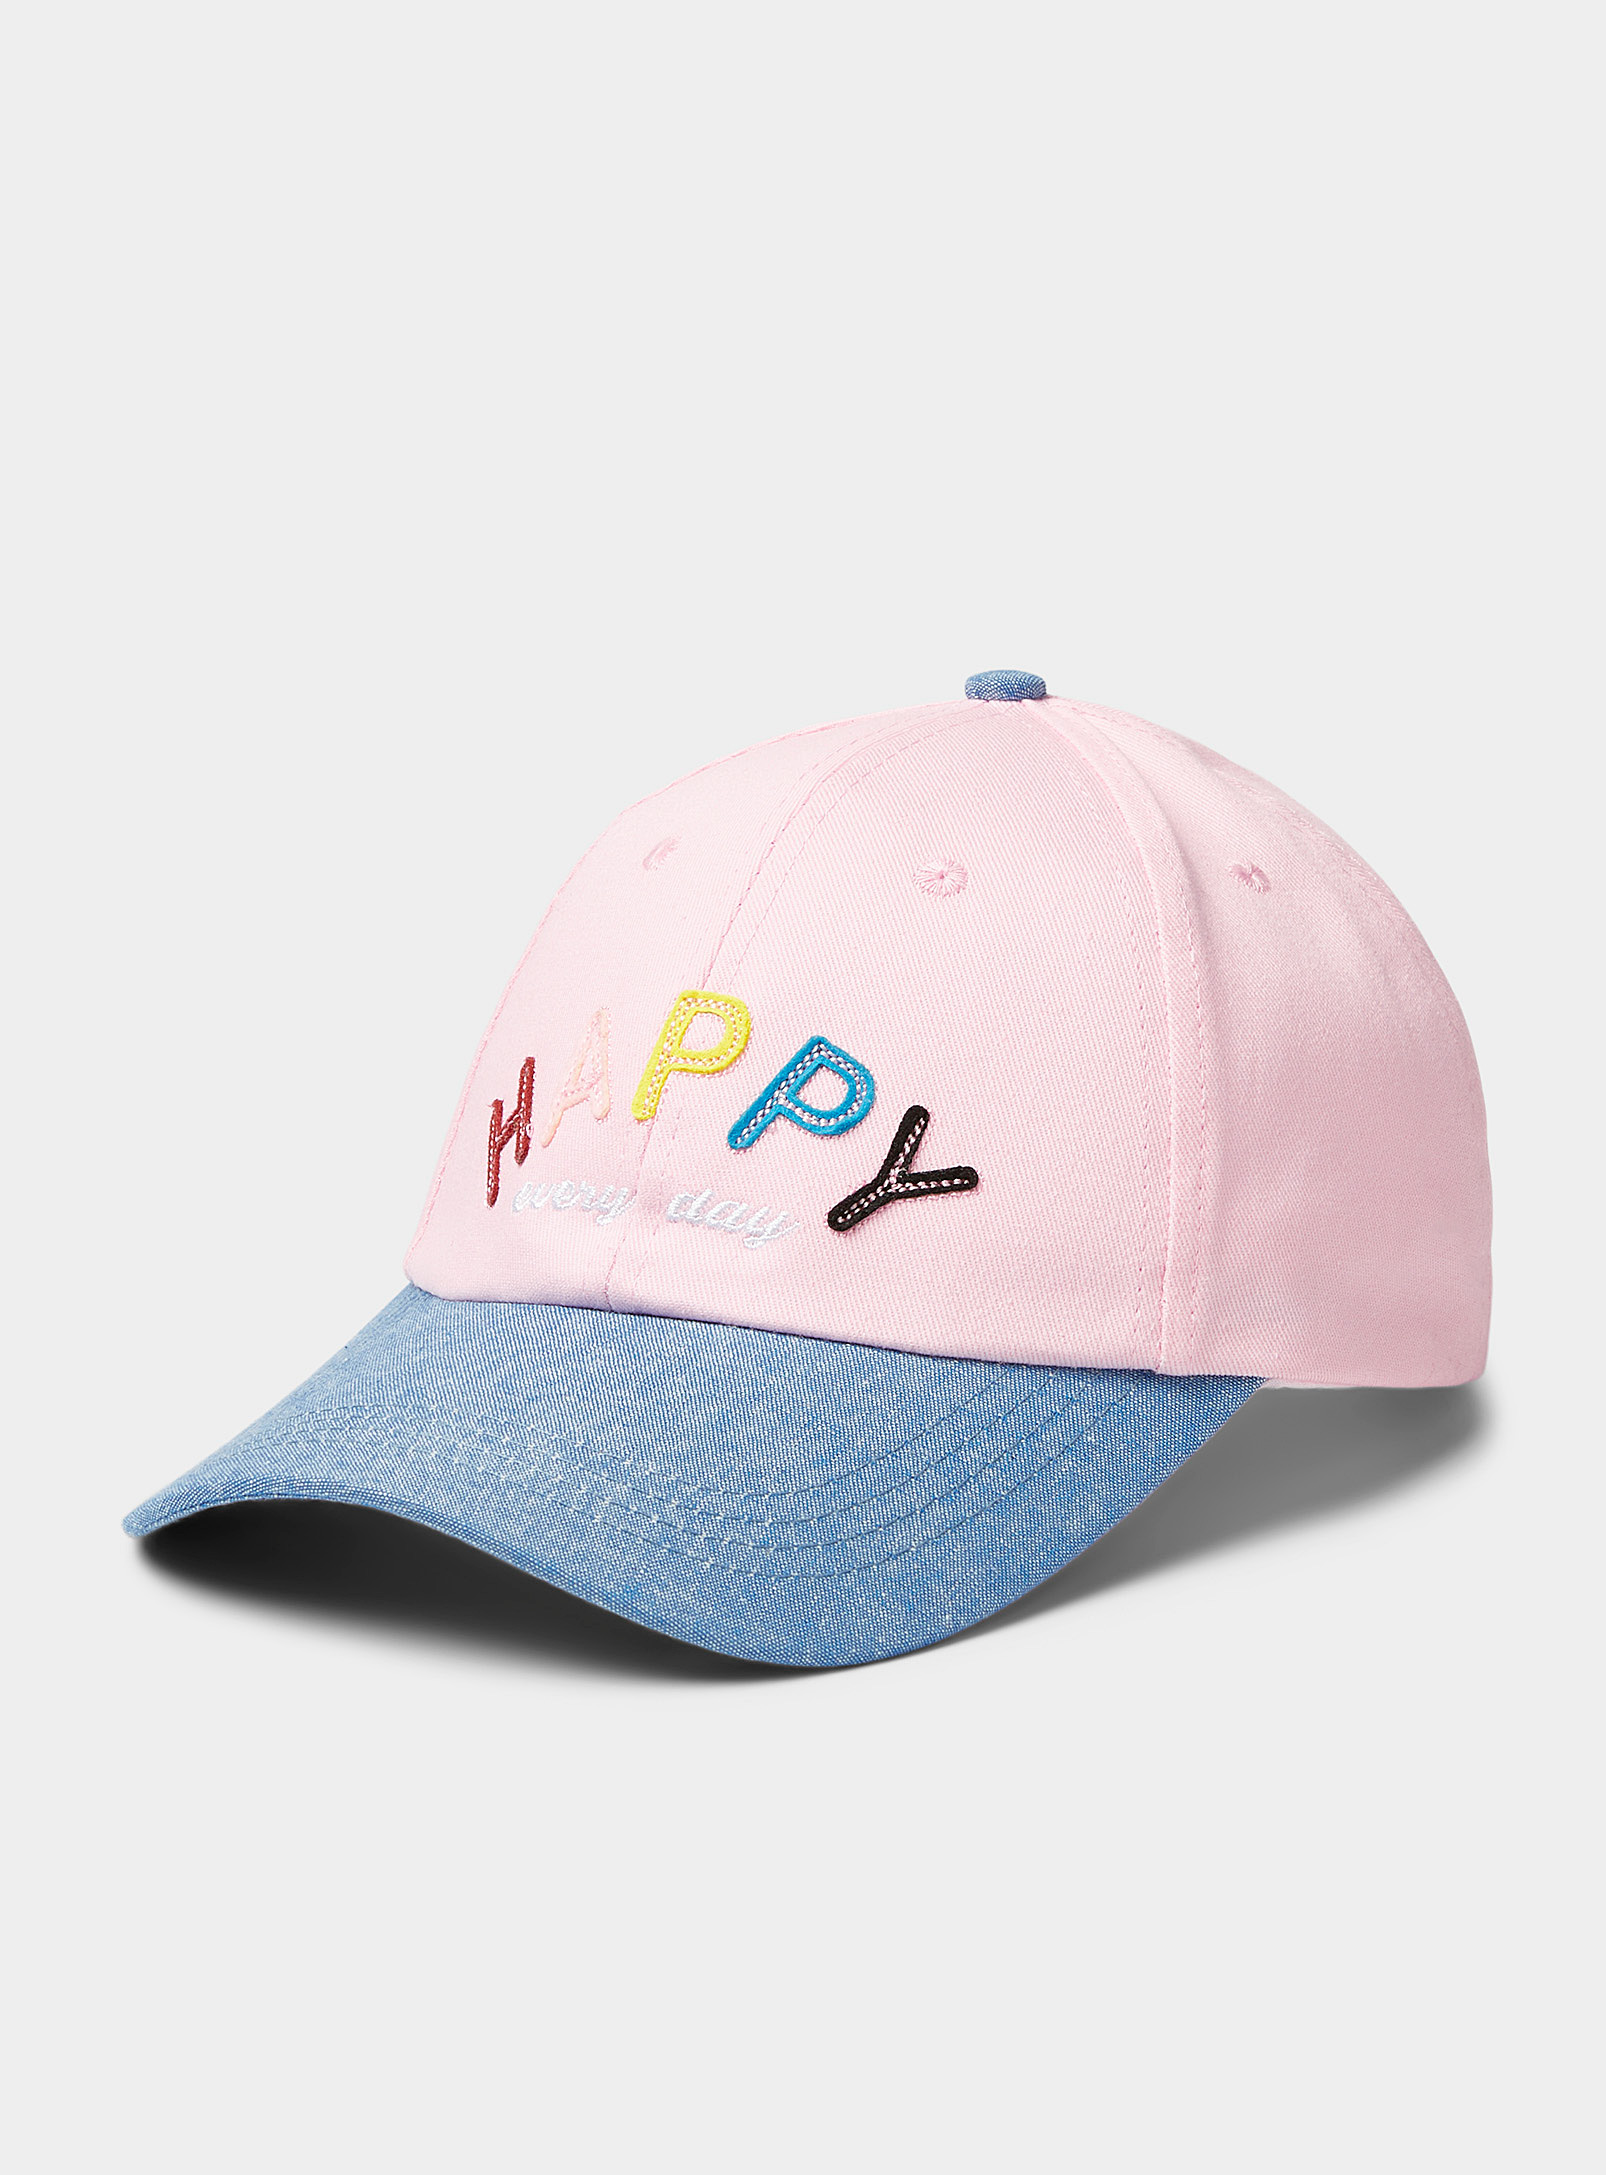 Nana The Brand Positive Embroidery Cap In Assorted